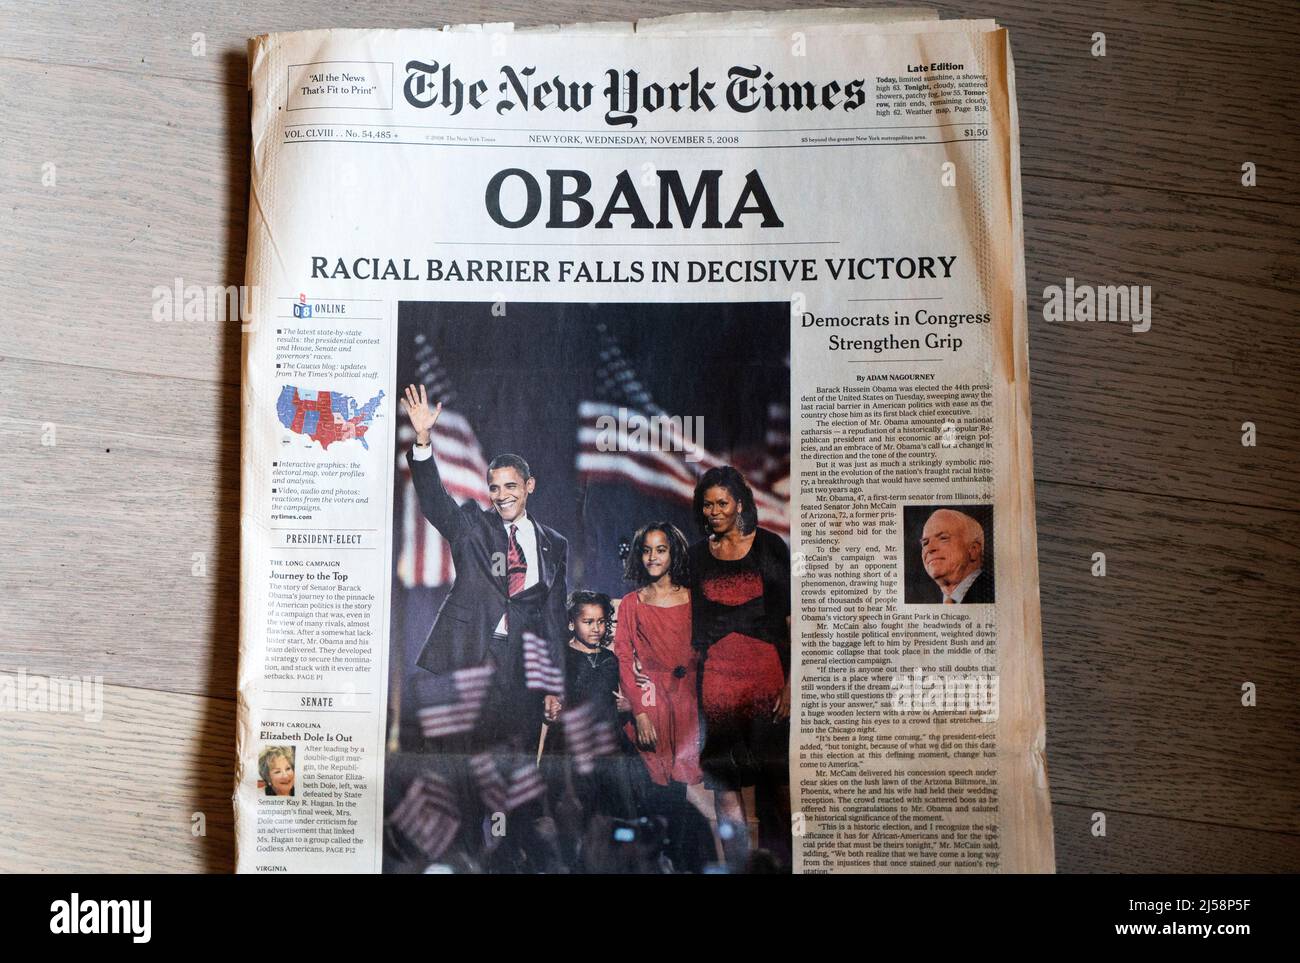 On Nov. 5, 2008, The New York Times announced Barrack Obama's victory in the U.S. presidential election with the headline, 'Obama' followed by 'Racial Barrier Falls in Decisive Victory.' Stock Photo